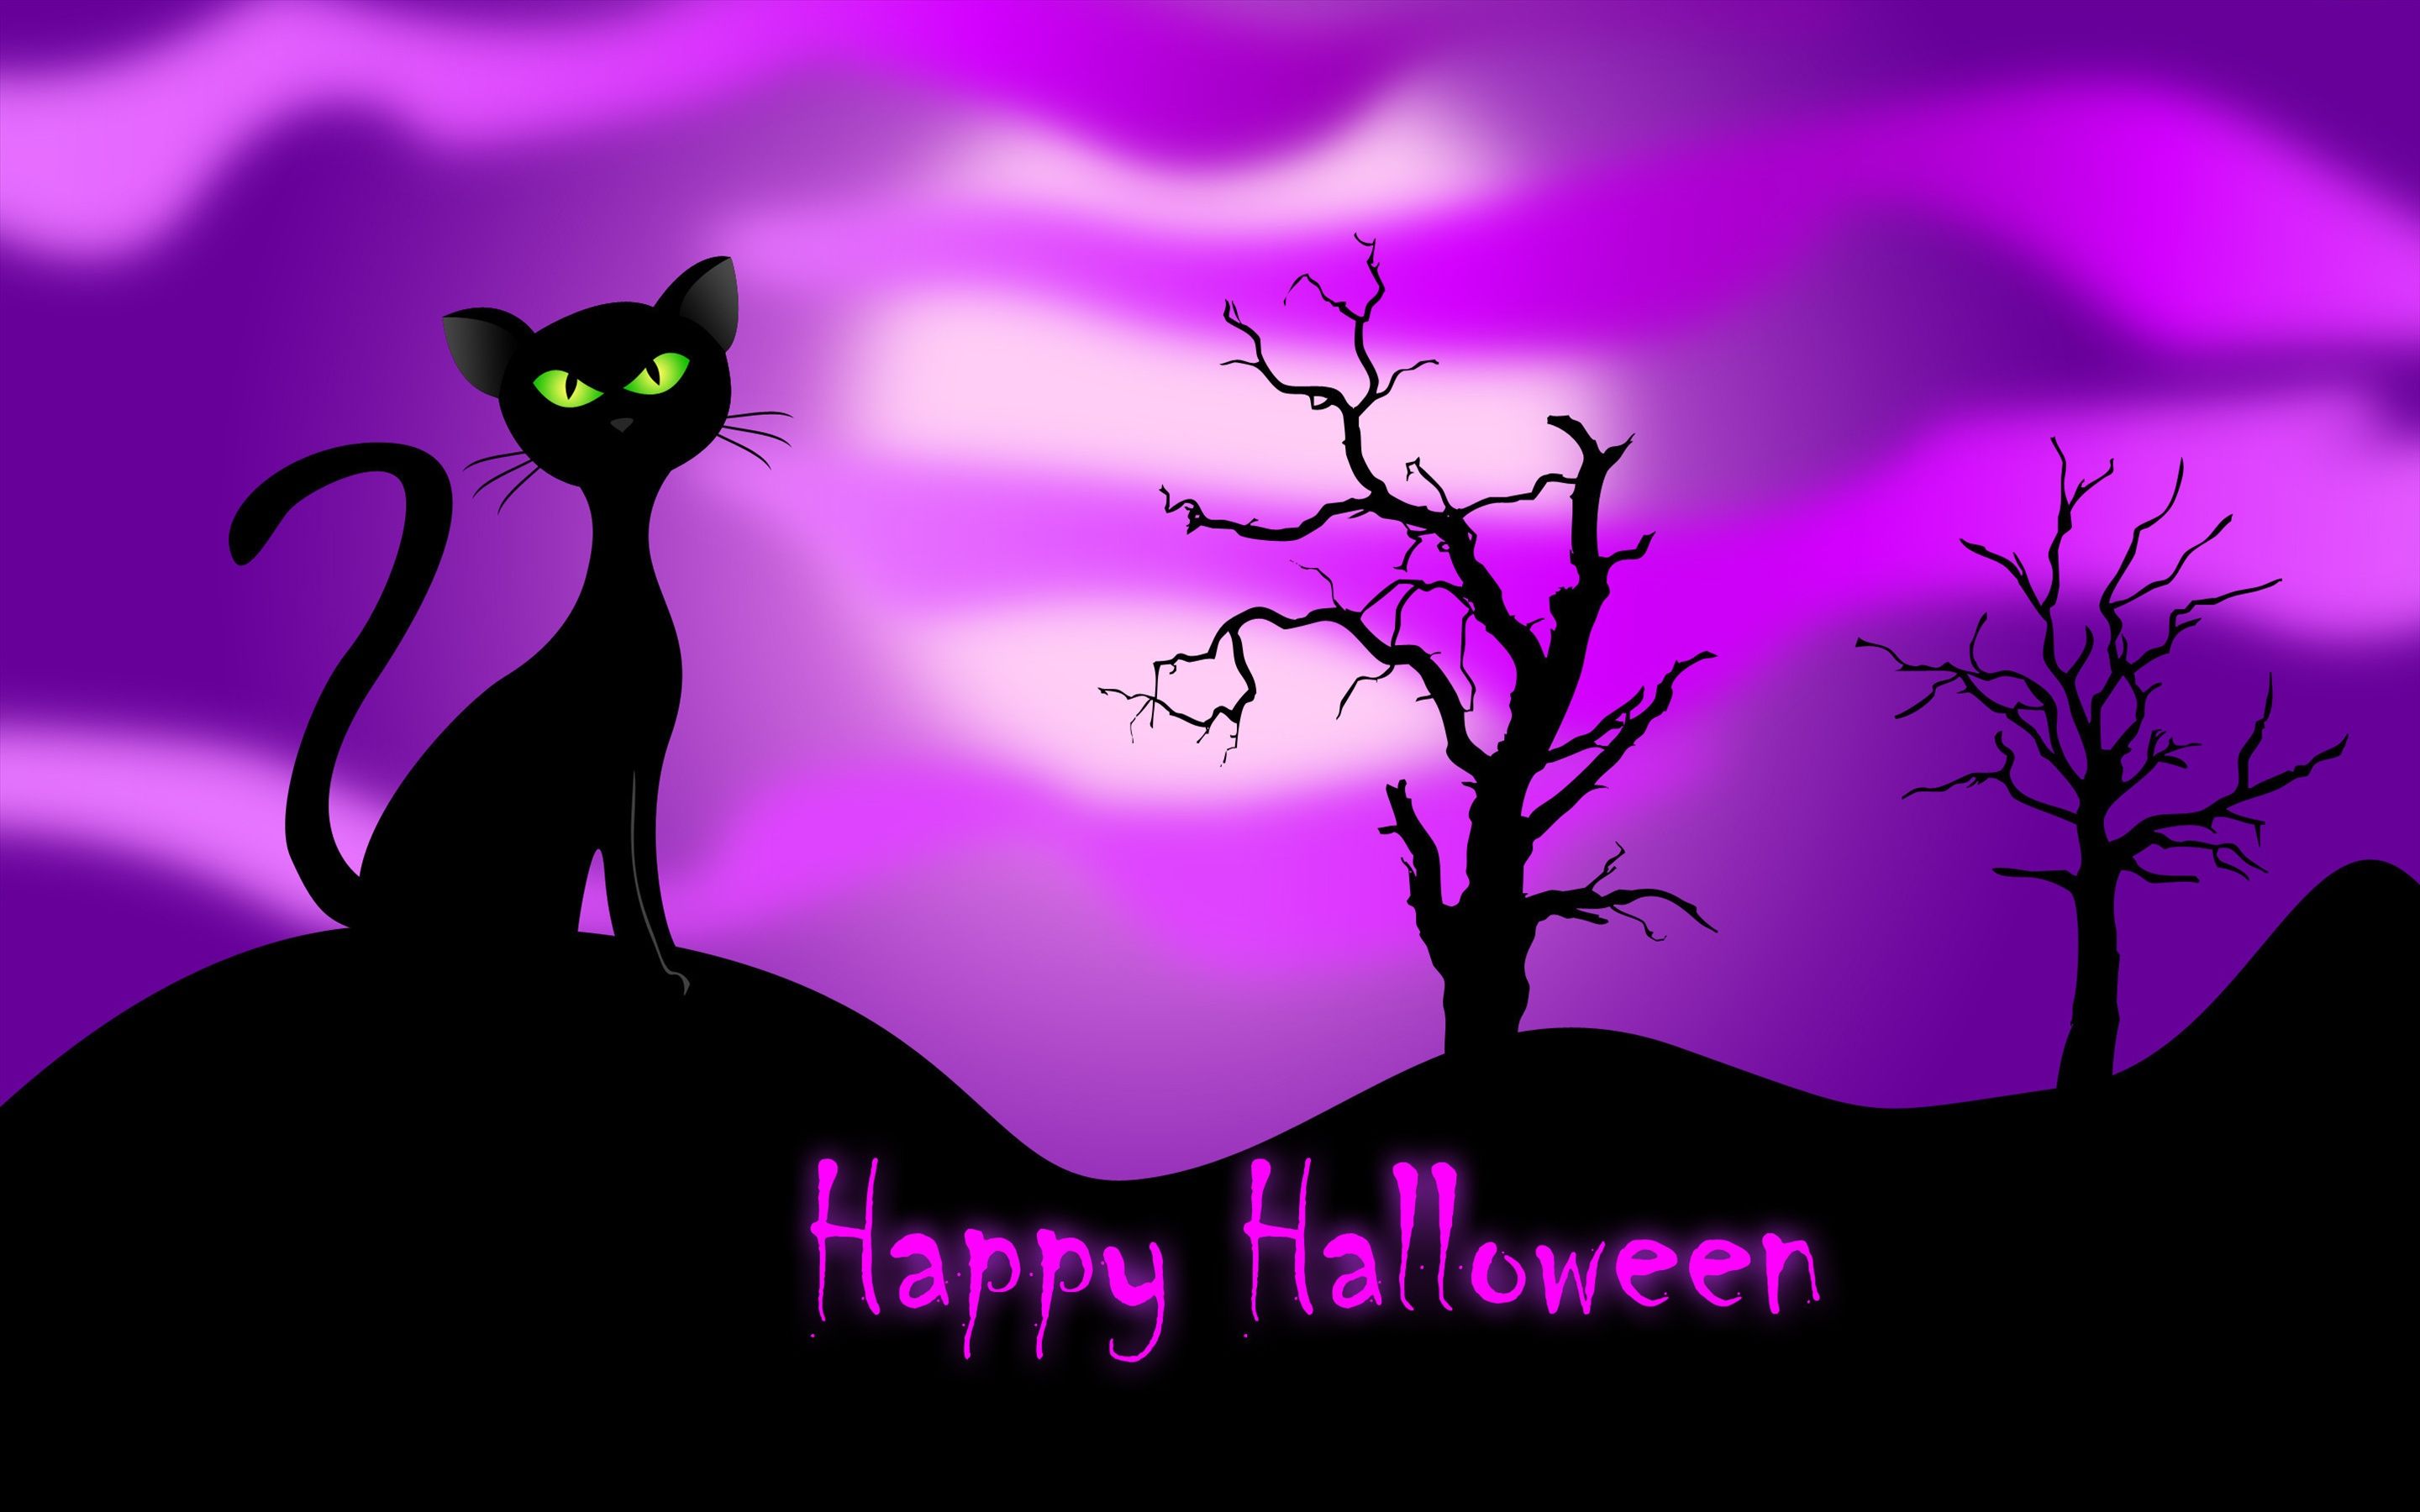 Happy Halloween Trees Black Cat Fall Purple Hd Wallpaper 1579264 Msyugioh123 38989660 2880 1800 Picture Frames For Facebook